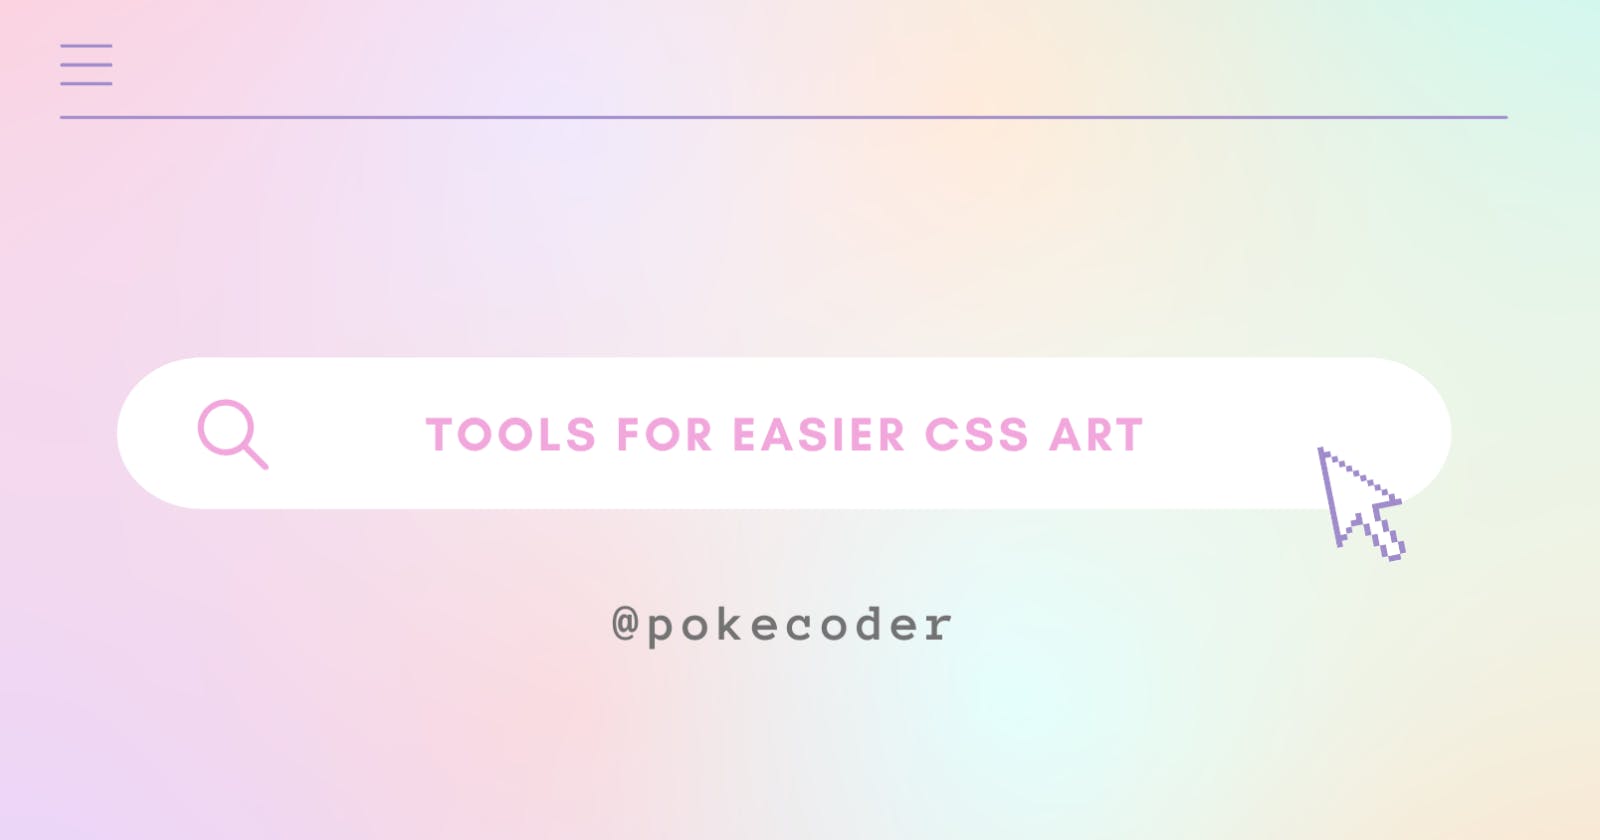 Tools for easier CSS art